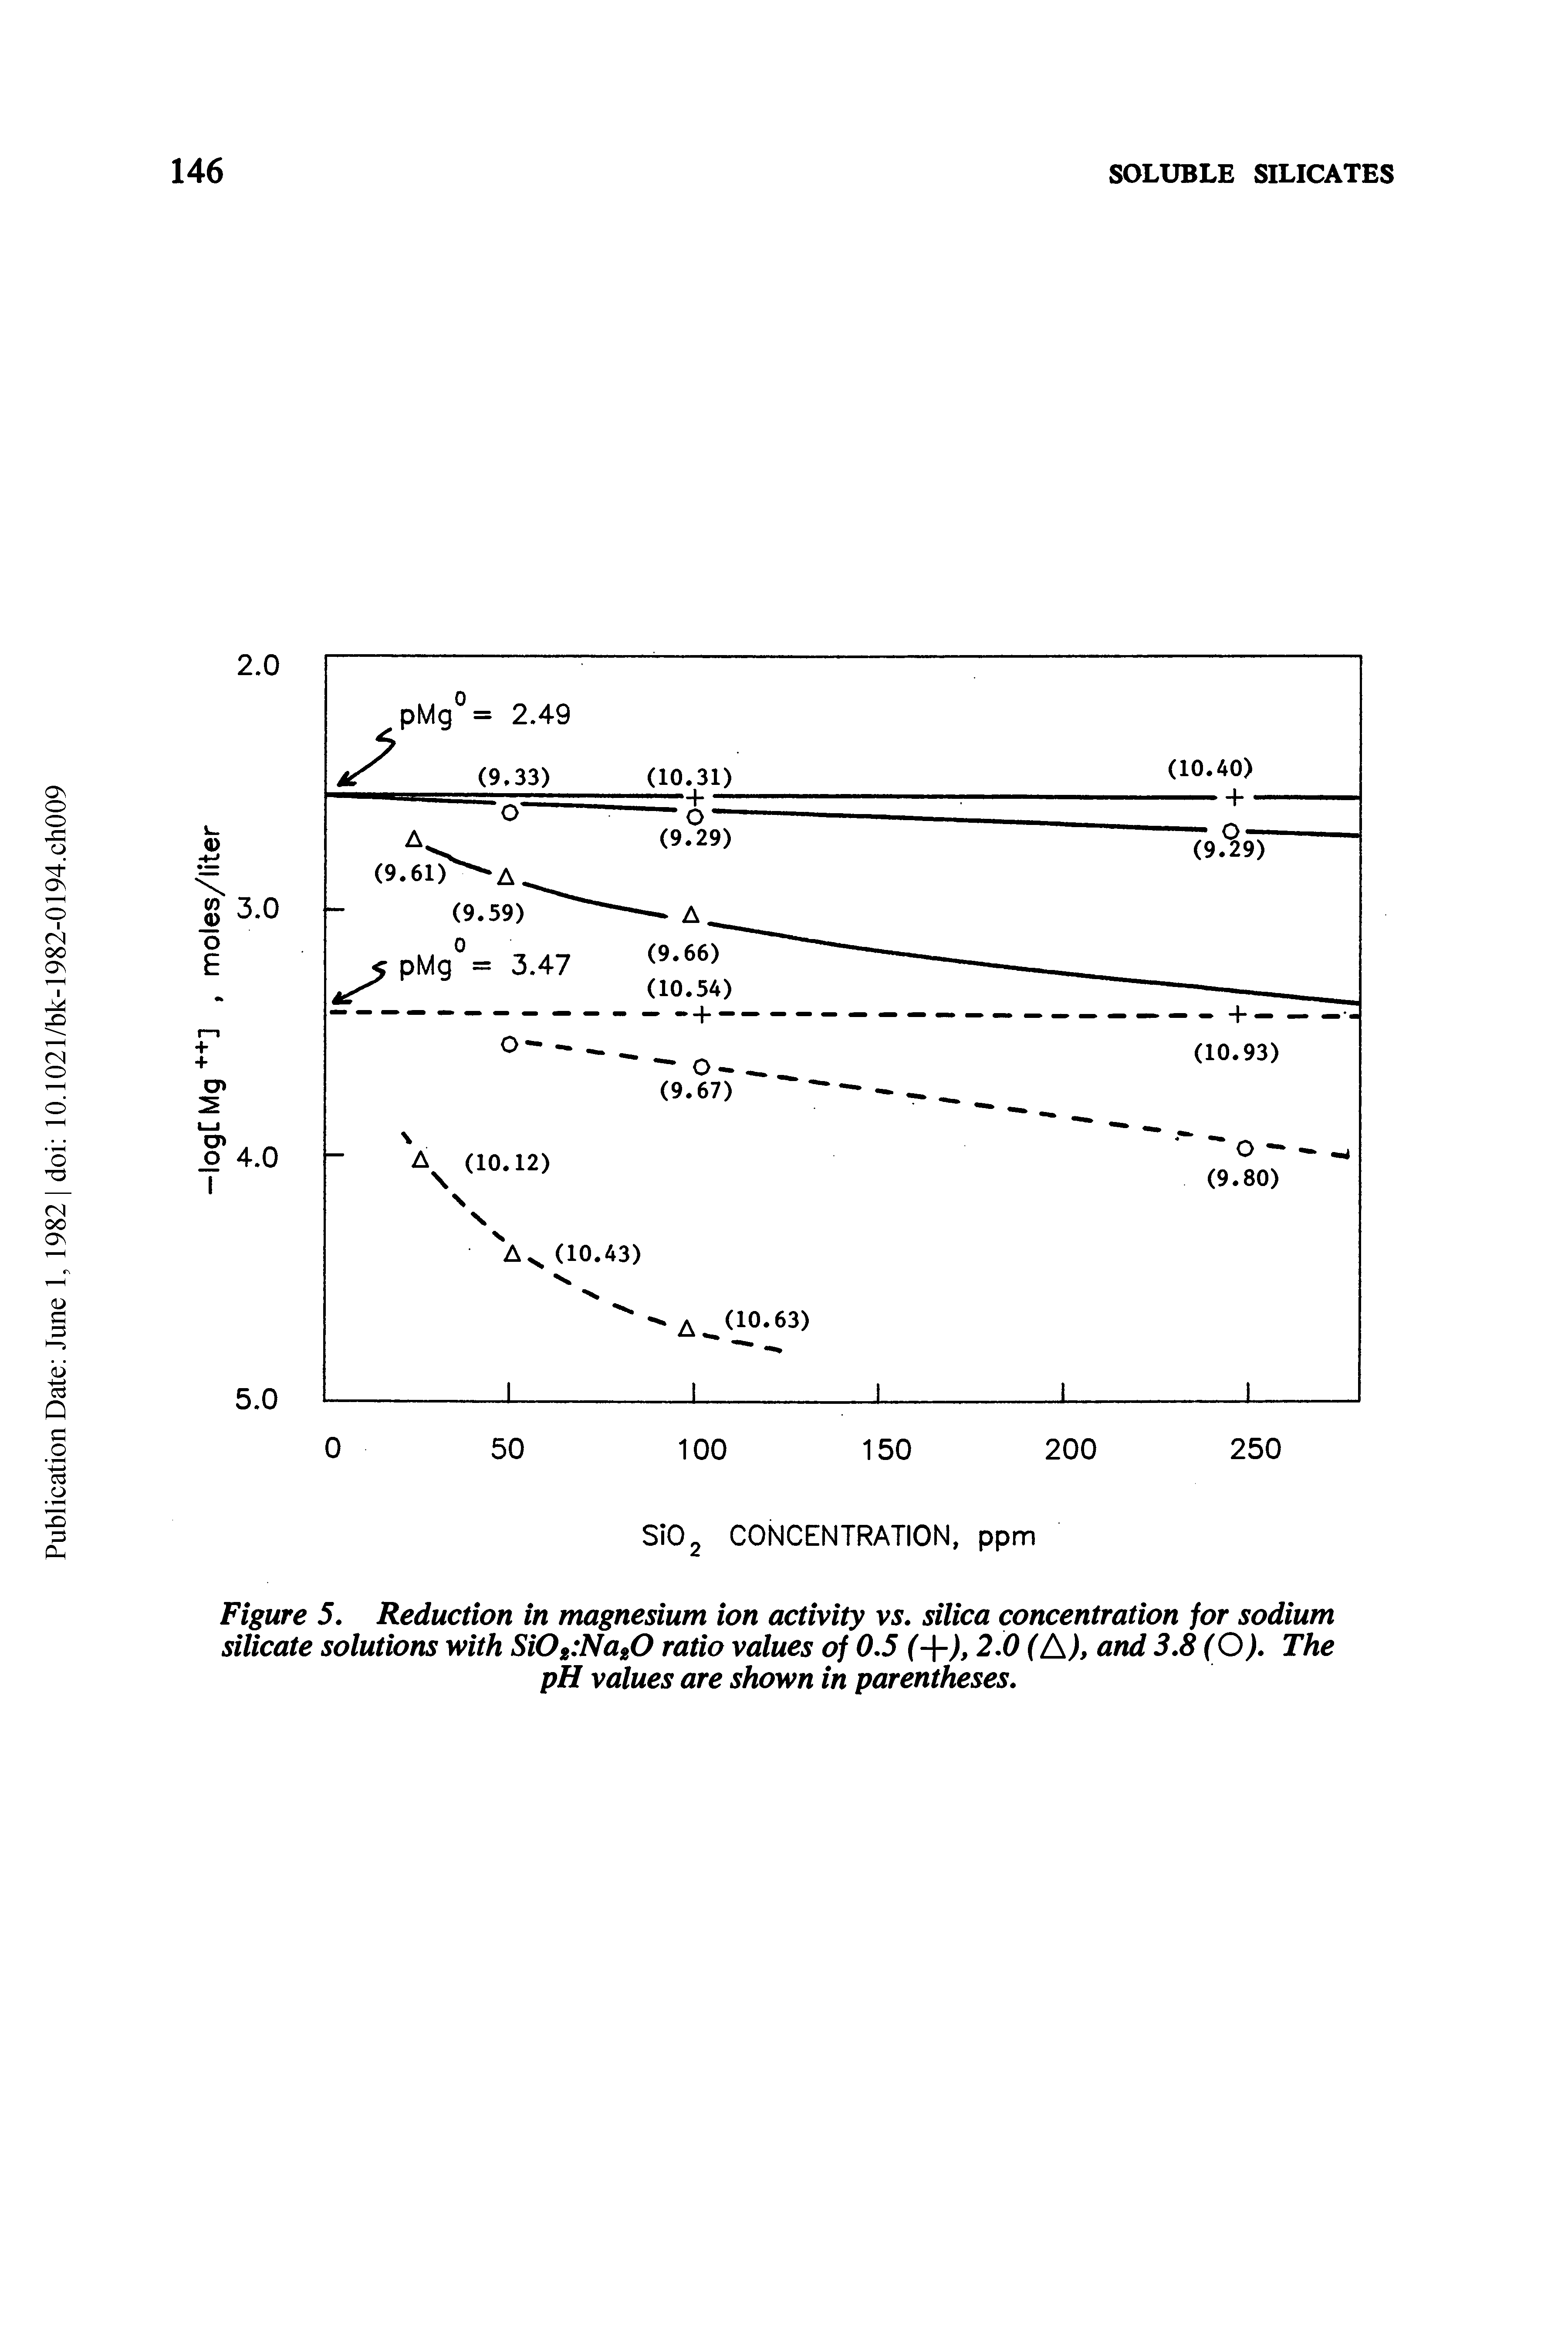 Figure 5. Reduction in magnesium ion activity vs, silica concentration for sodium silicate solutions with SiOt NasQ ratio values of 0.5 f+J, 2.0 f and 3,8 (O), The pH values are shown in parentheses.